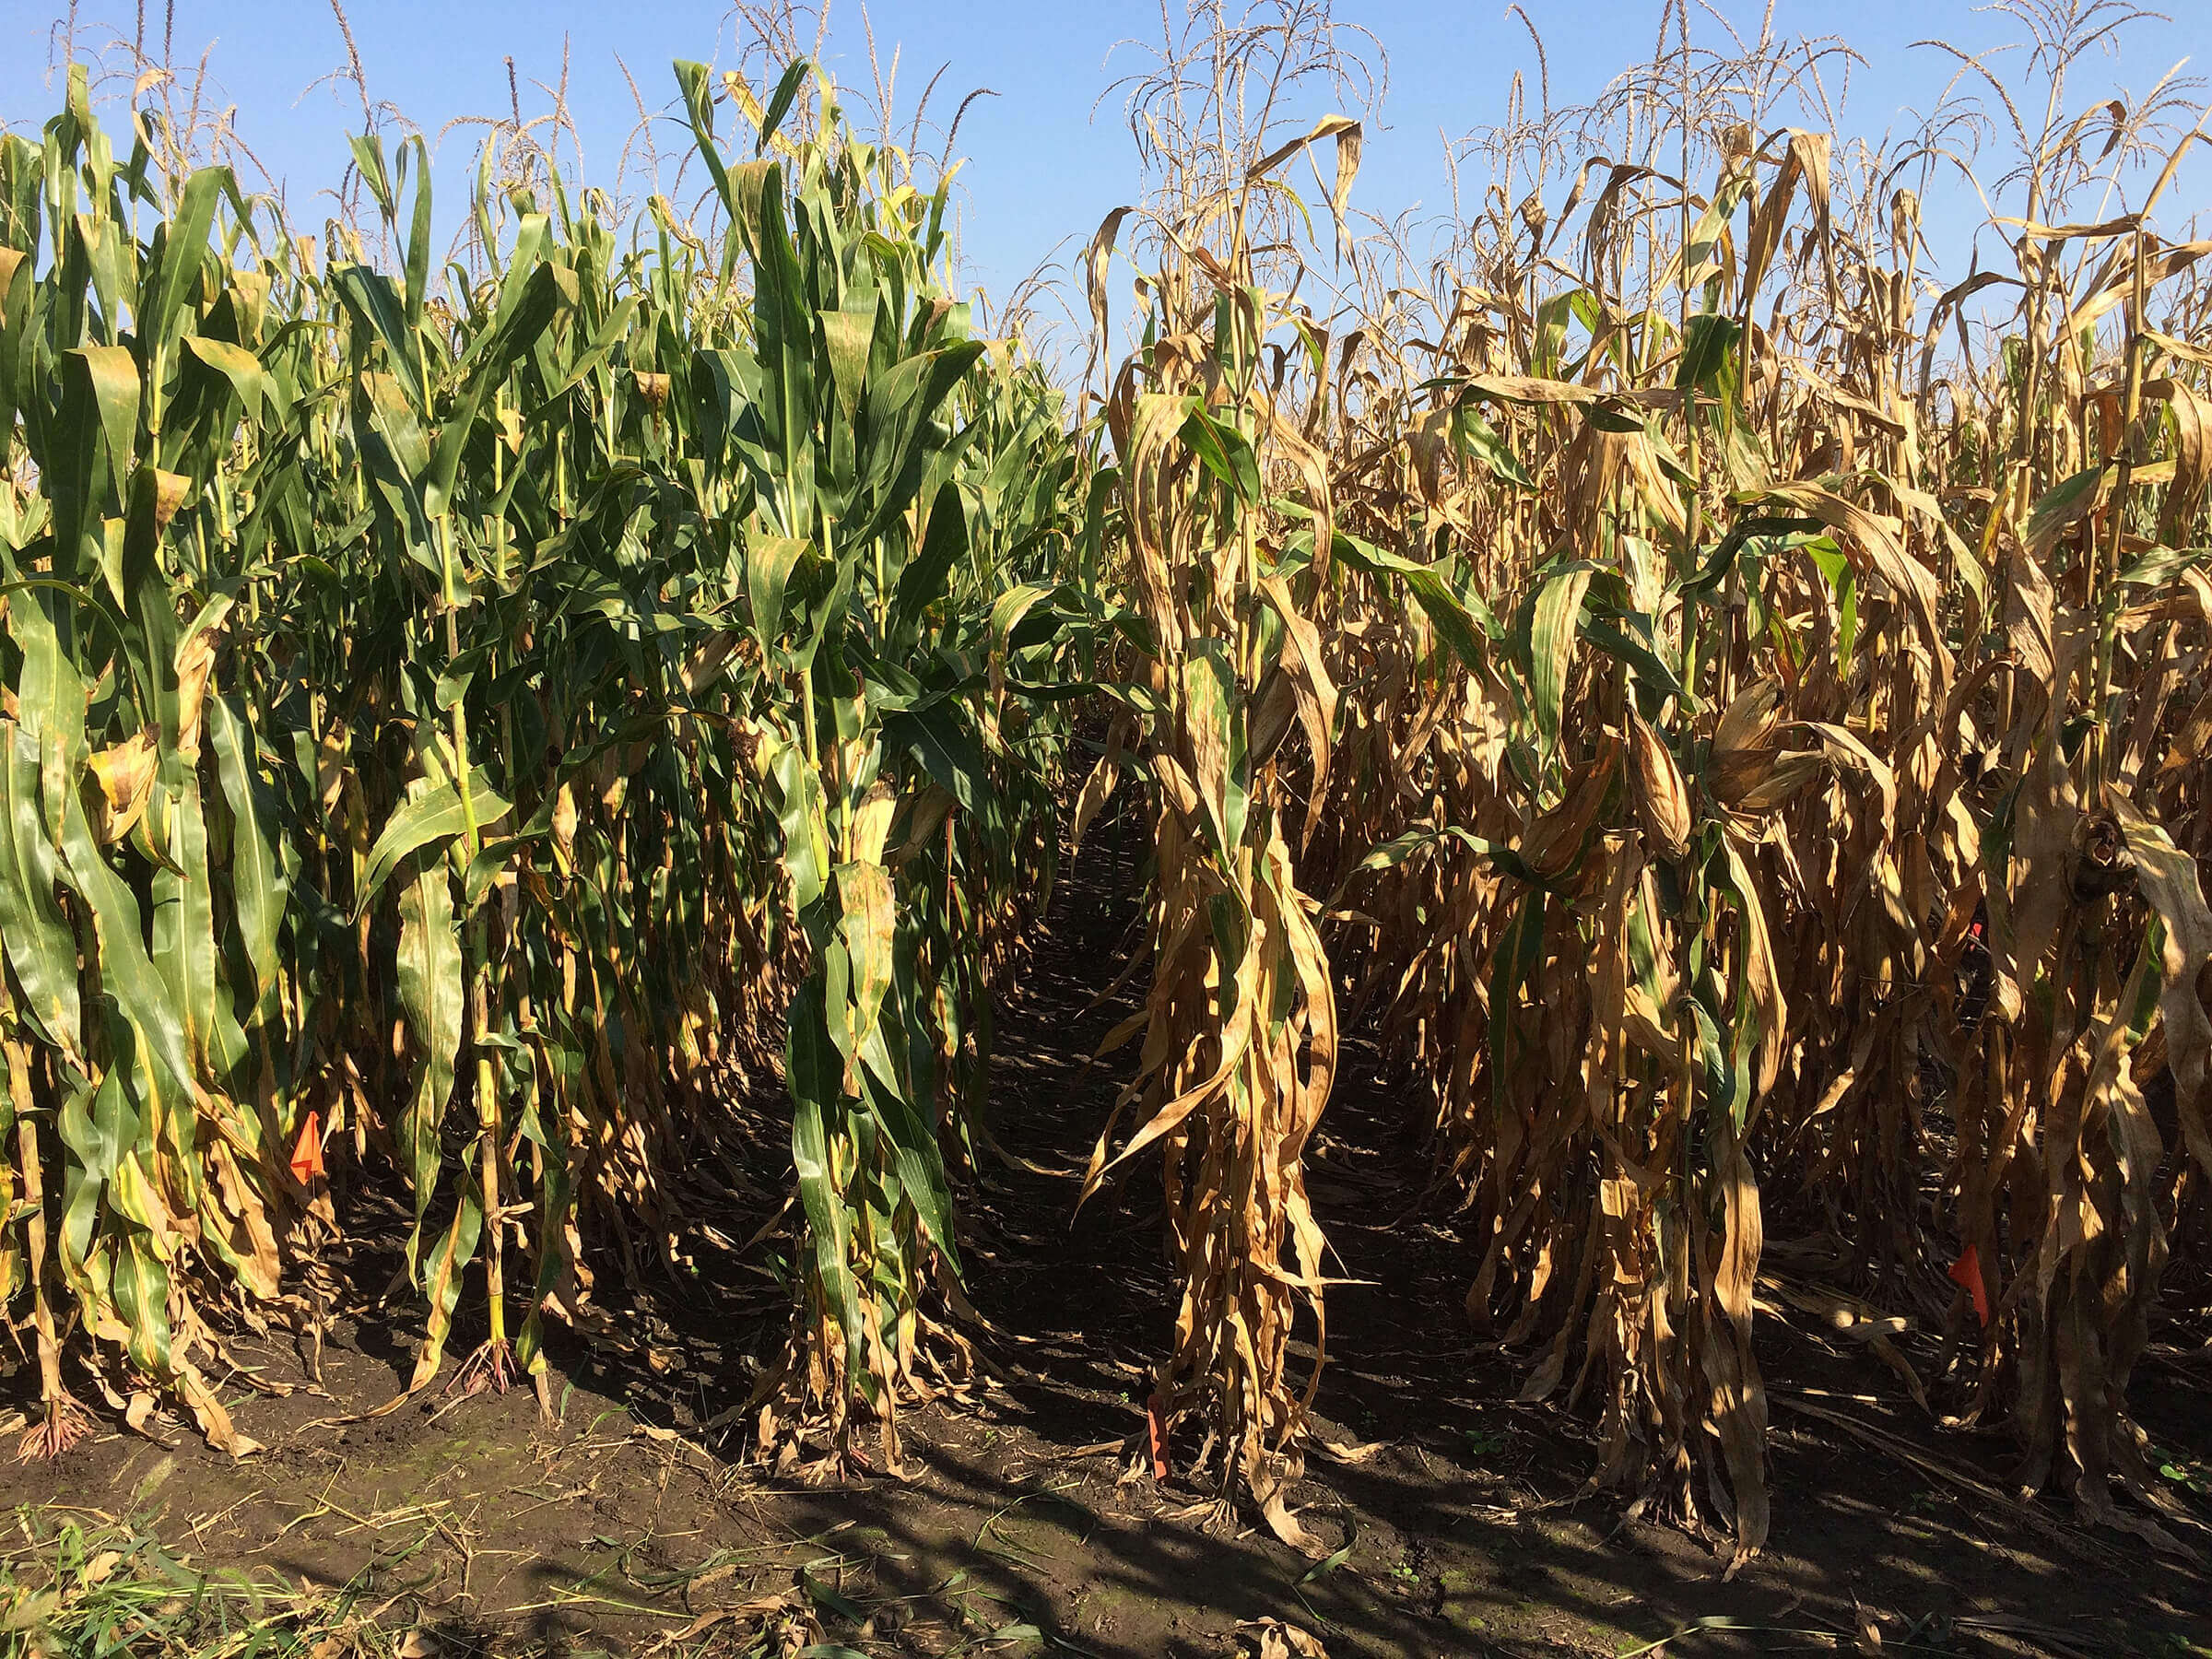 An early corn hybrid from 1958 (right) versus a more modern hybrid from 2015 (left). The modern crops retain leaf nitrogen longer, keeping leaves green for continued photosynthesis that allows plants to increase kernel number and size